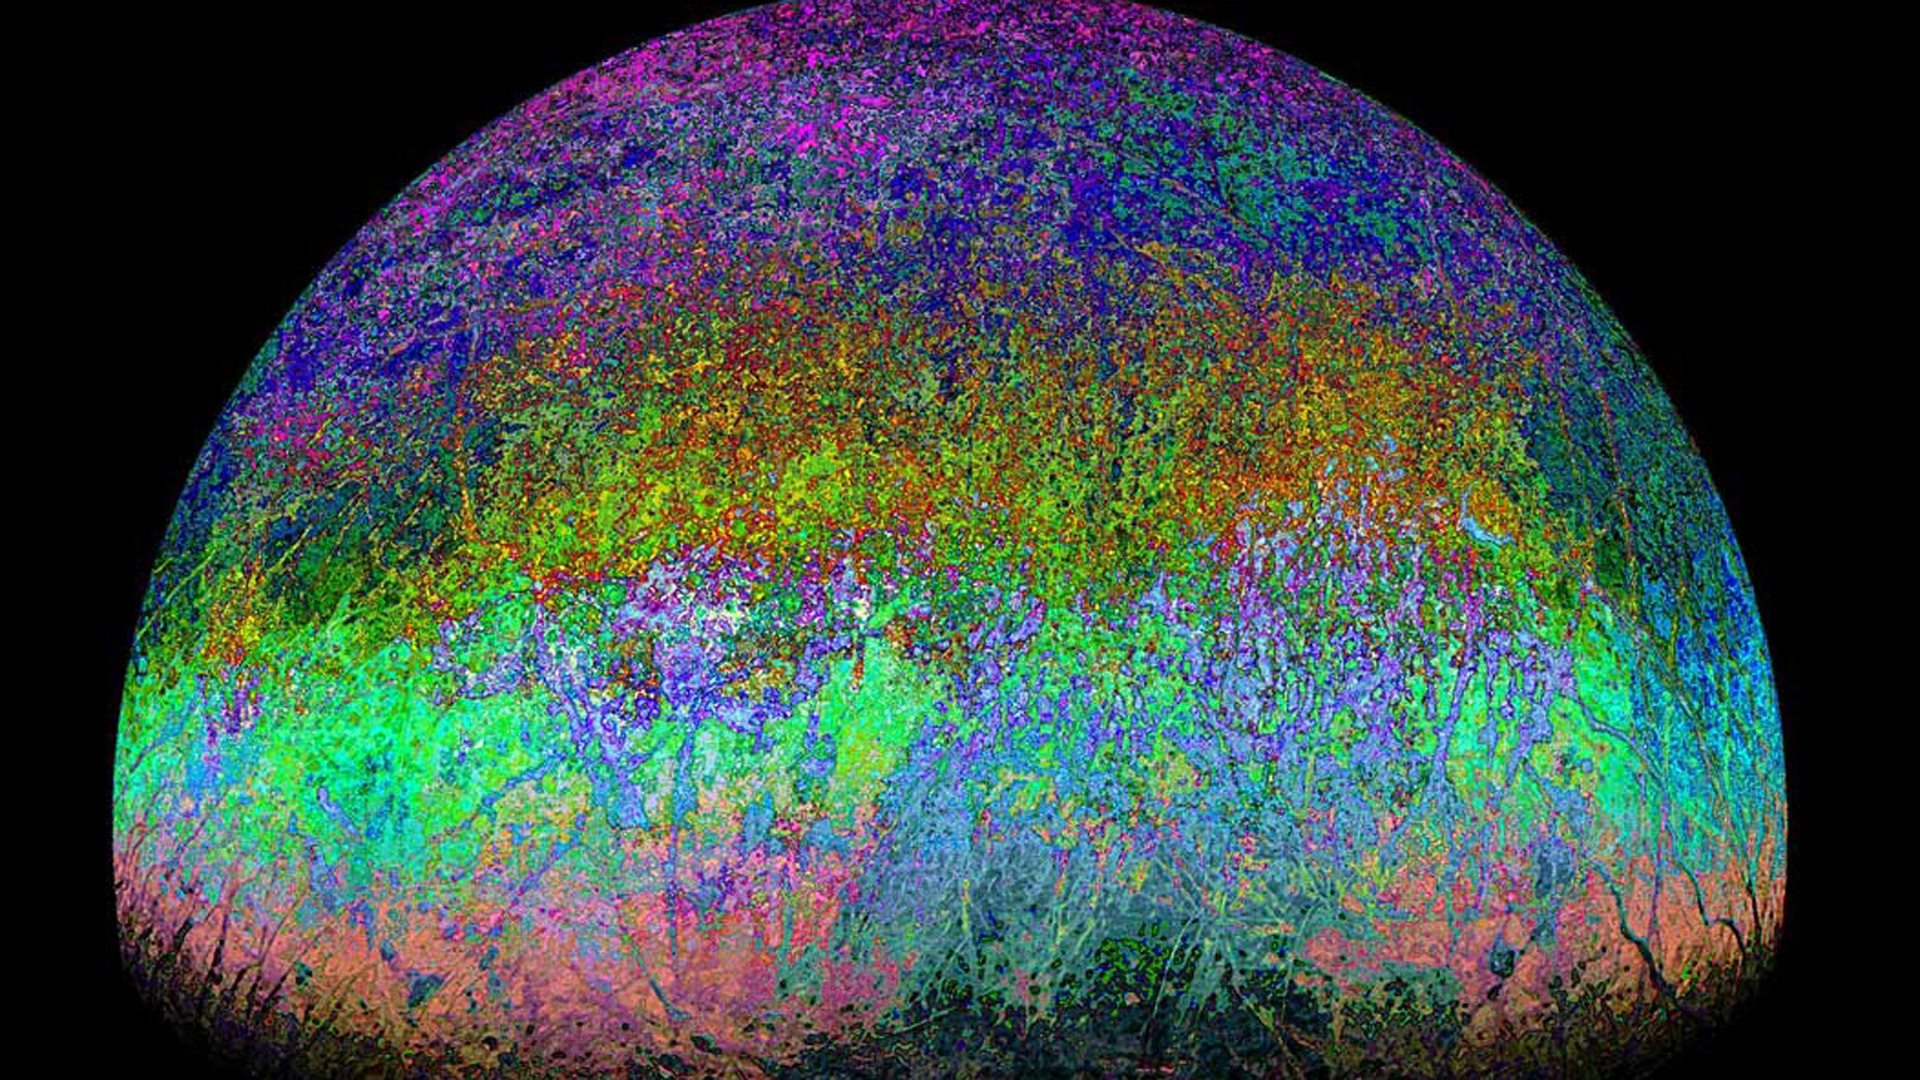 a rainbow colored image of europa, jupiter's moon